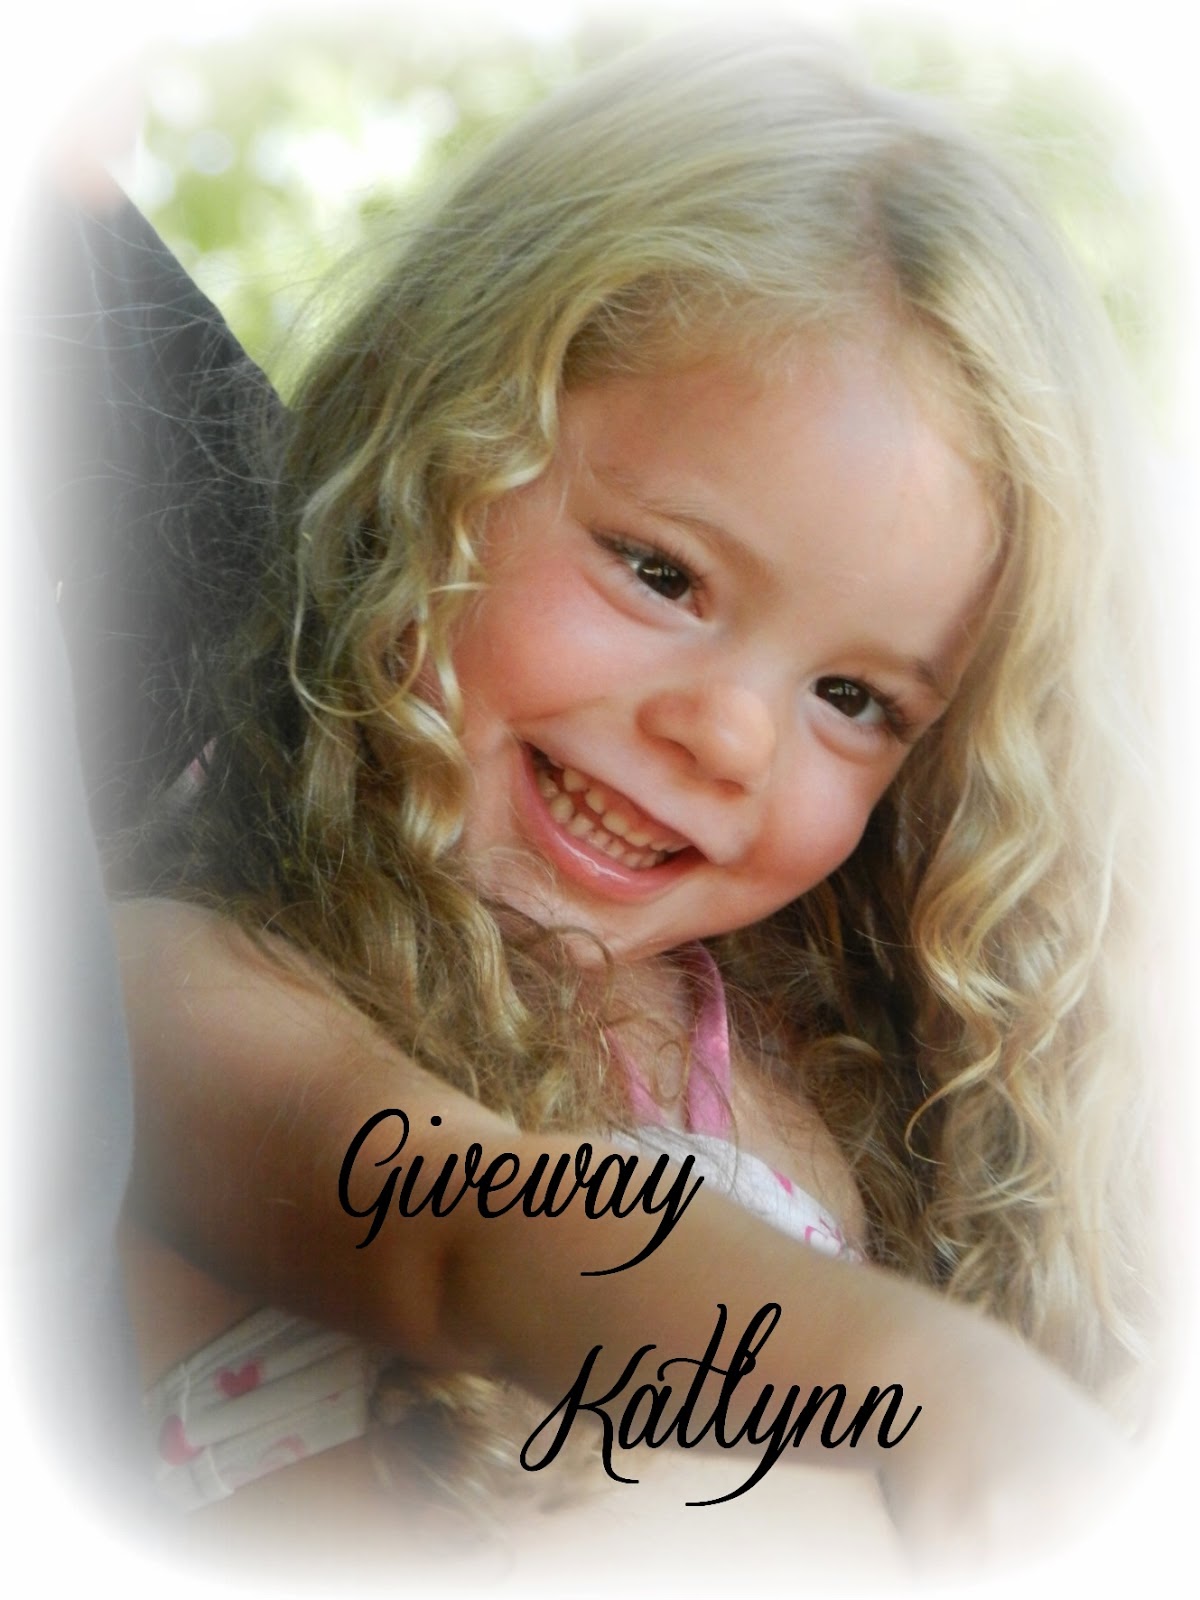 http://lafeerieduscrap.blogspot.fr/2014/04/giveway-for-my-daughter.html